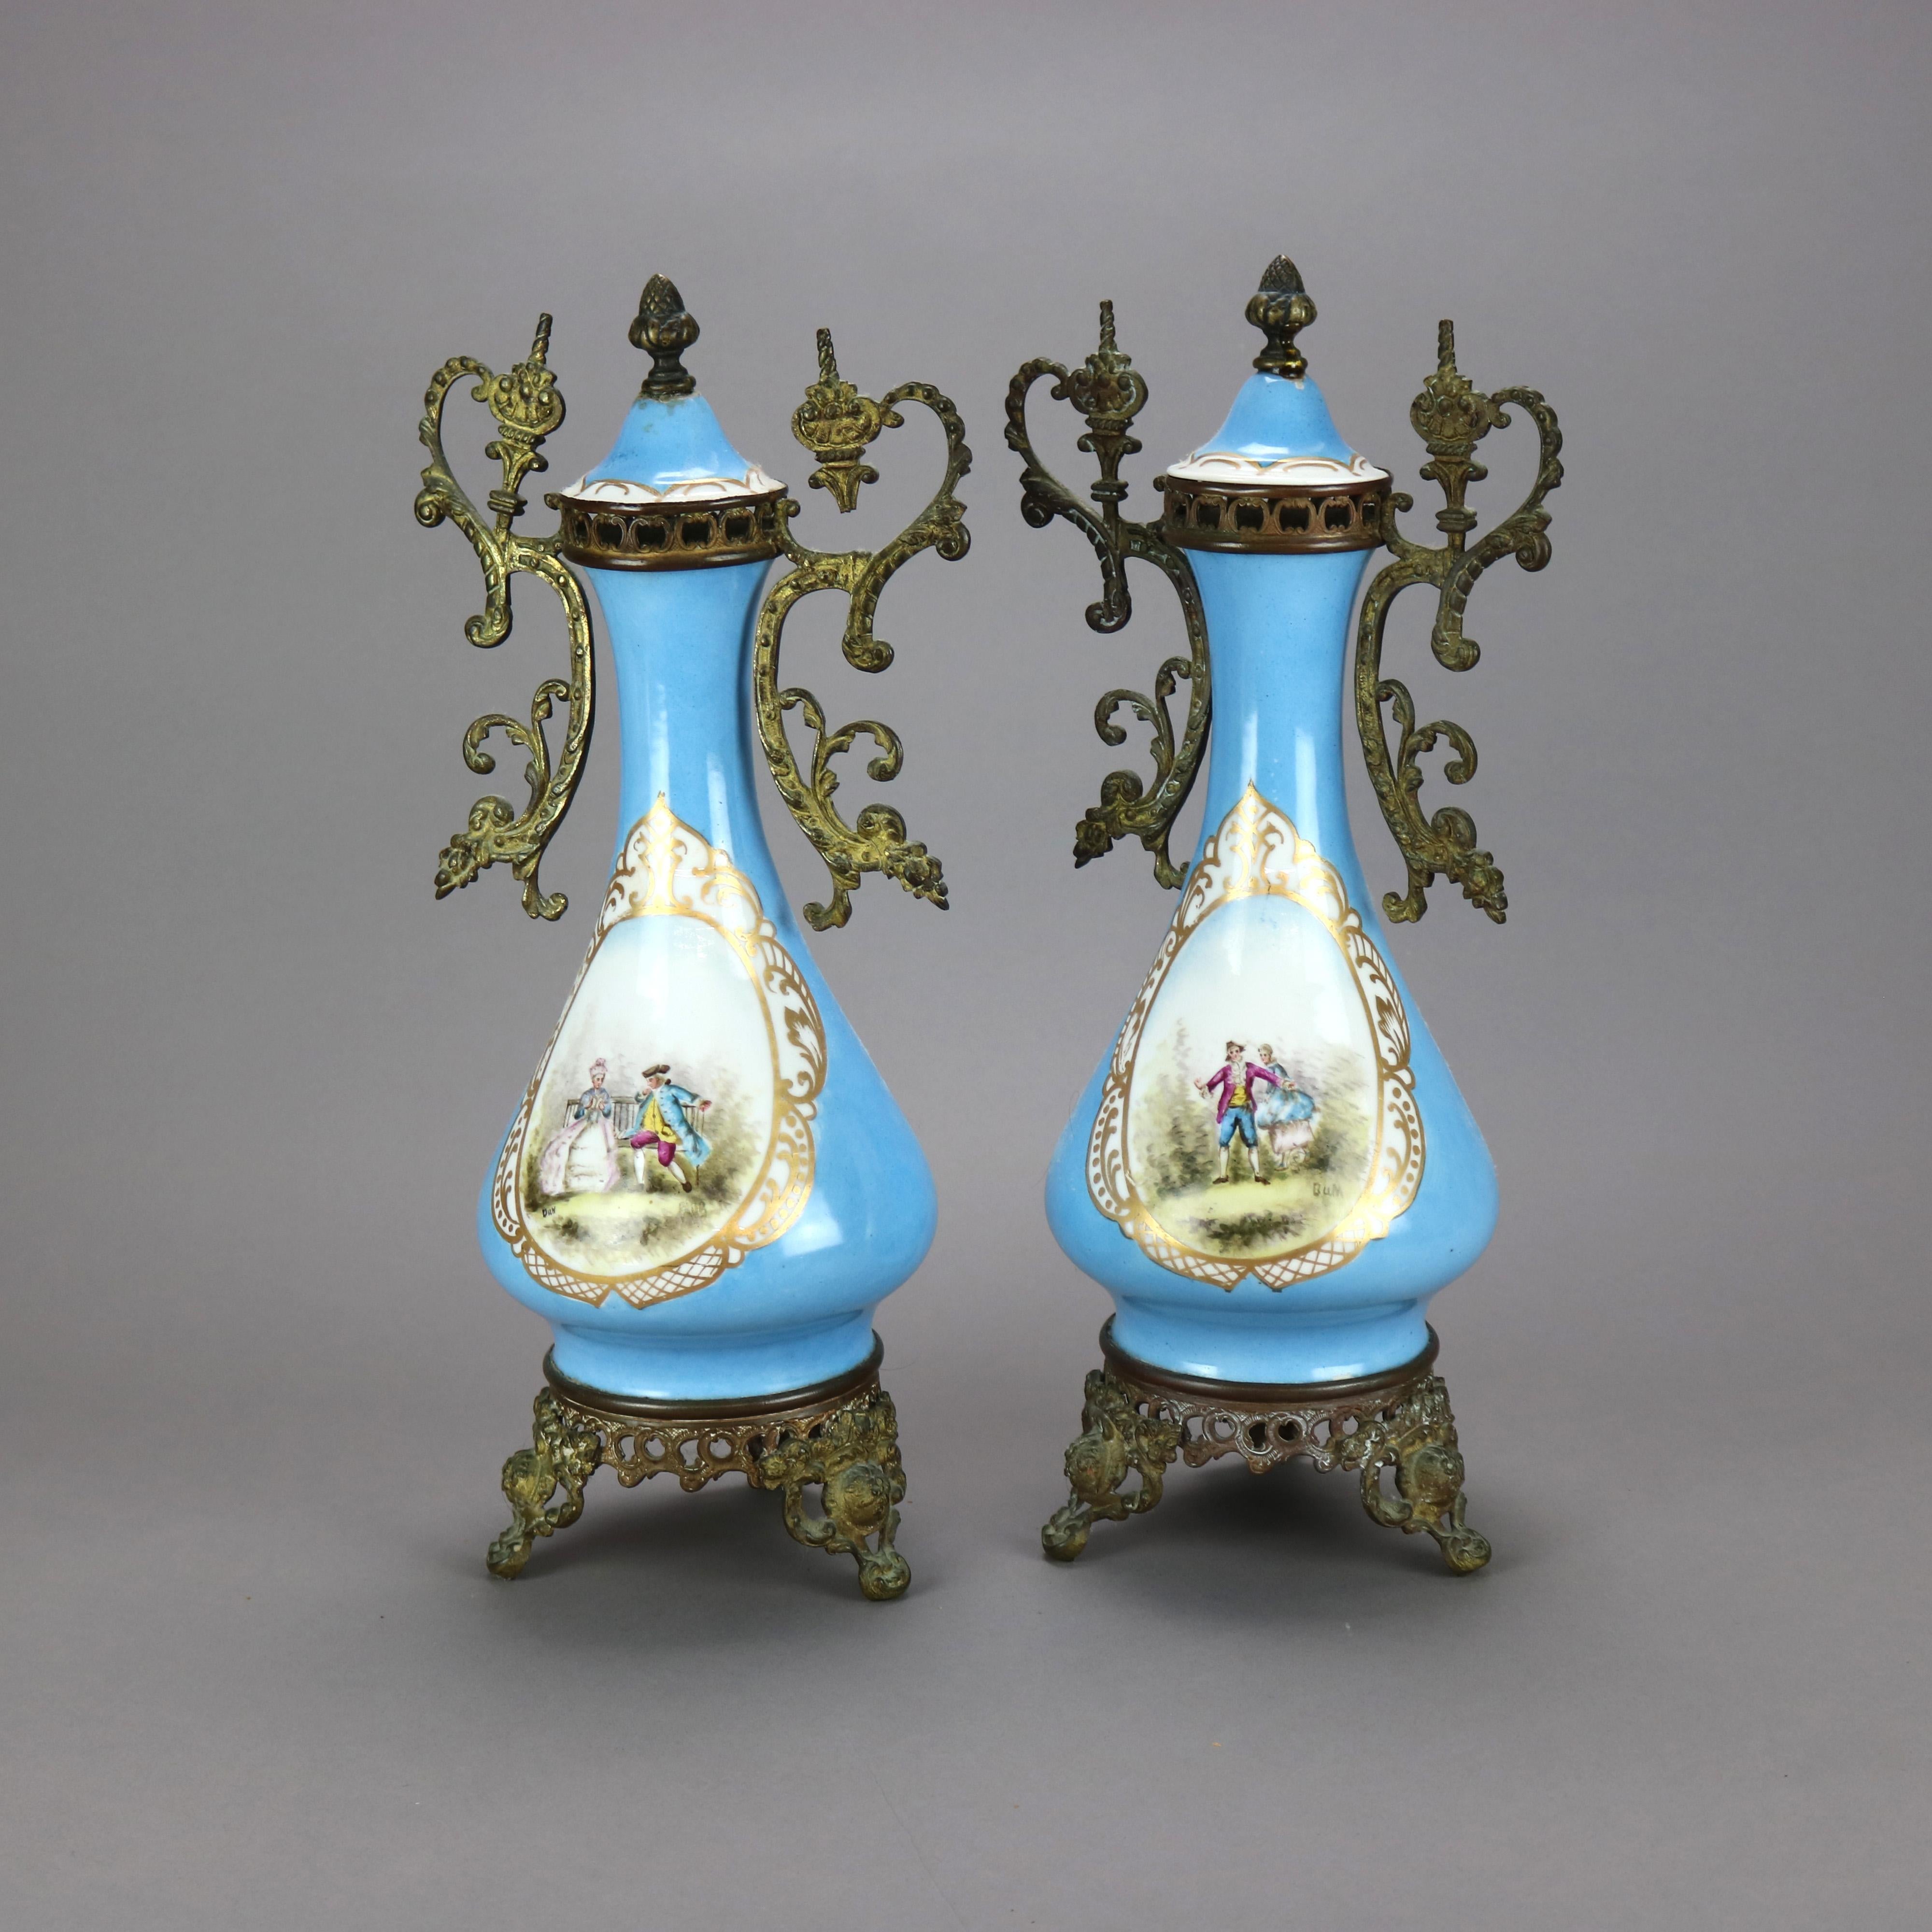 An antique pair of French Sevres covered urns offer porcelain construction with reserves having hand painted courting scenes with gilt trimming, foliate cast ormolu mounts, and signed with maker on lid as photographed, c1890

Measures - 16.75'' H